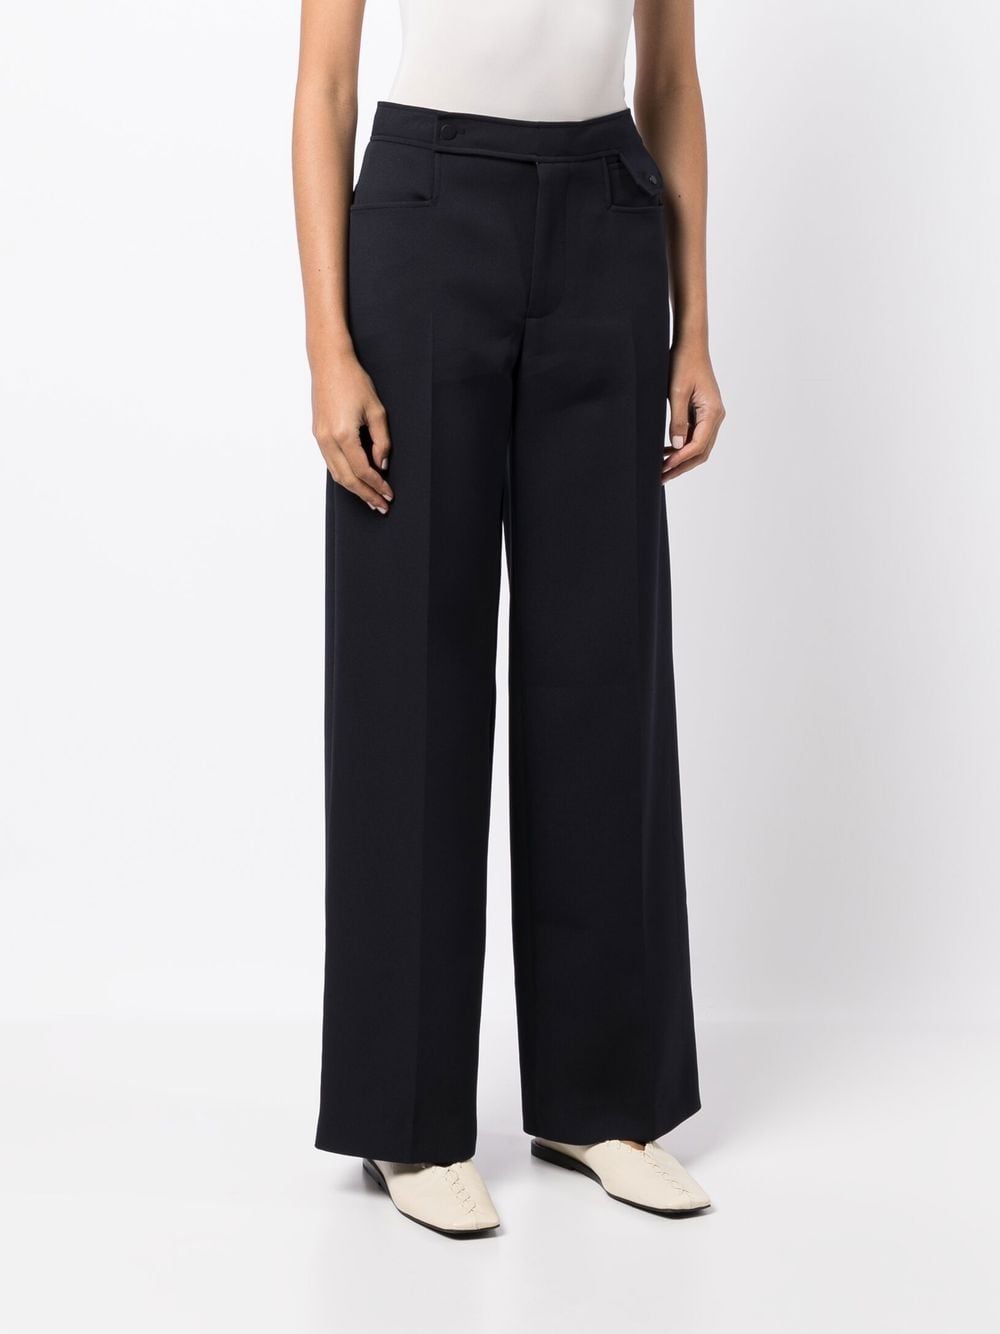 Purchase Wholesale wide leg pants. Free Returns & Net 60 Terms on